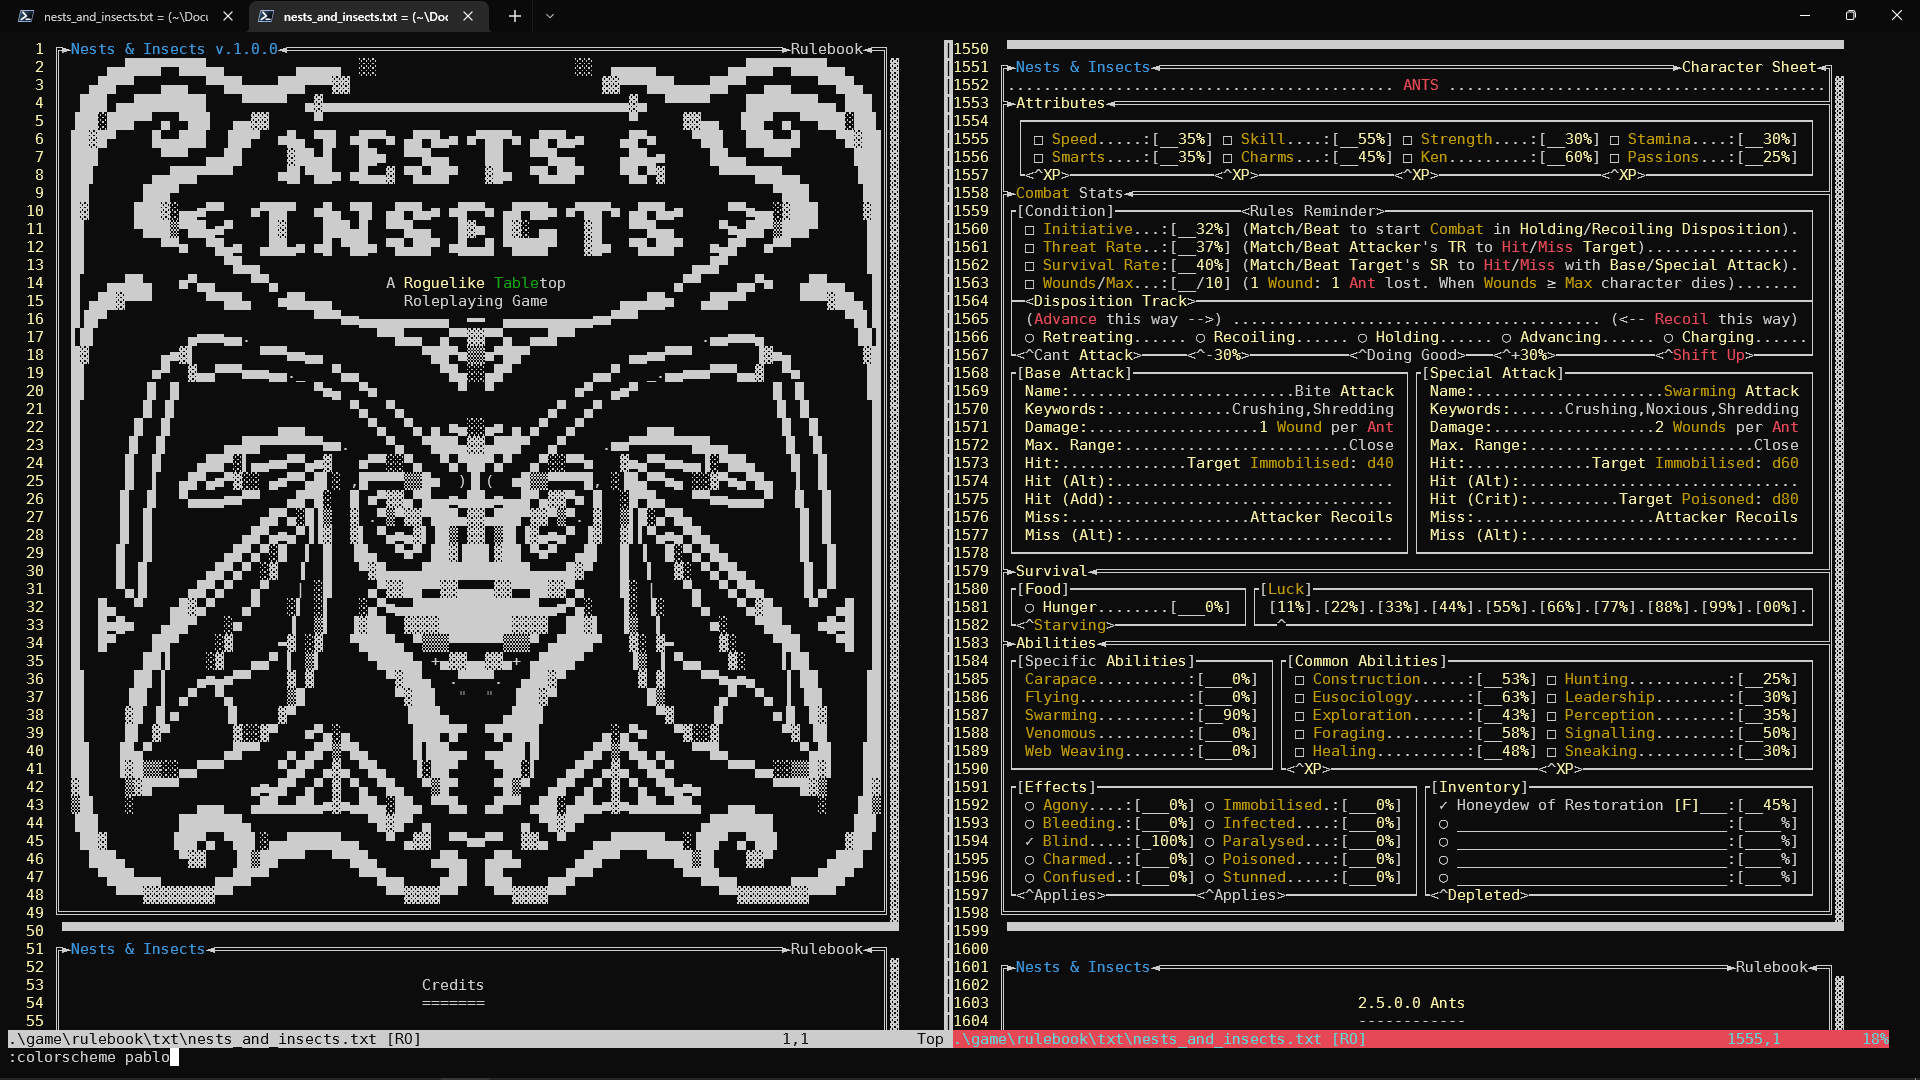 Nests & Insects rulebooks in Glorious ASCII